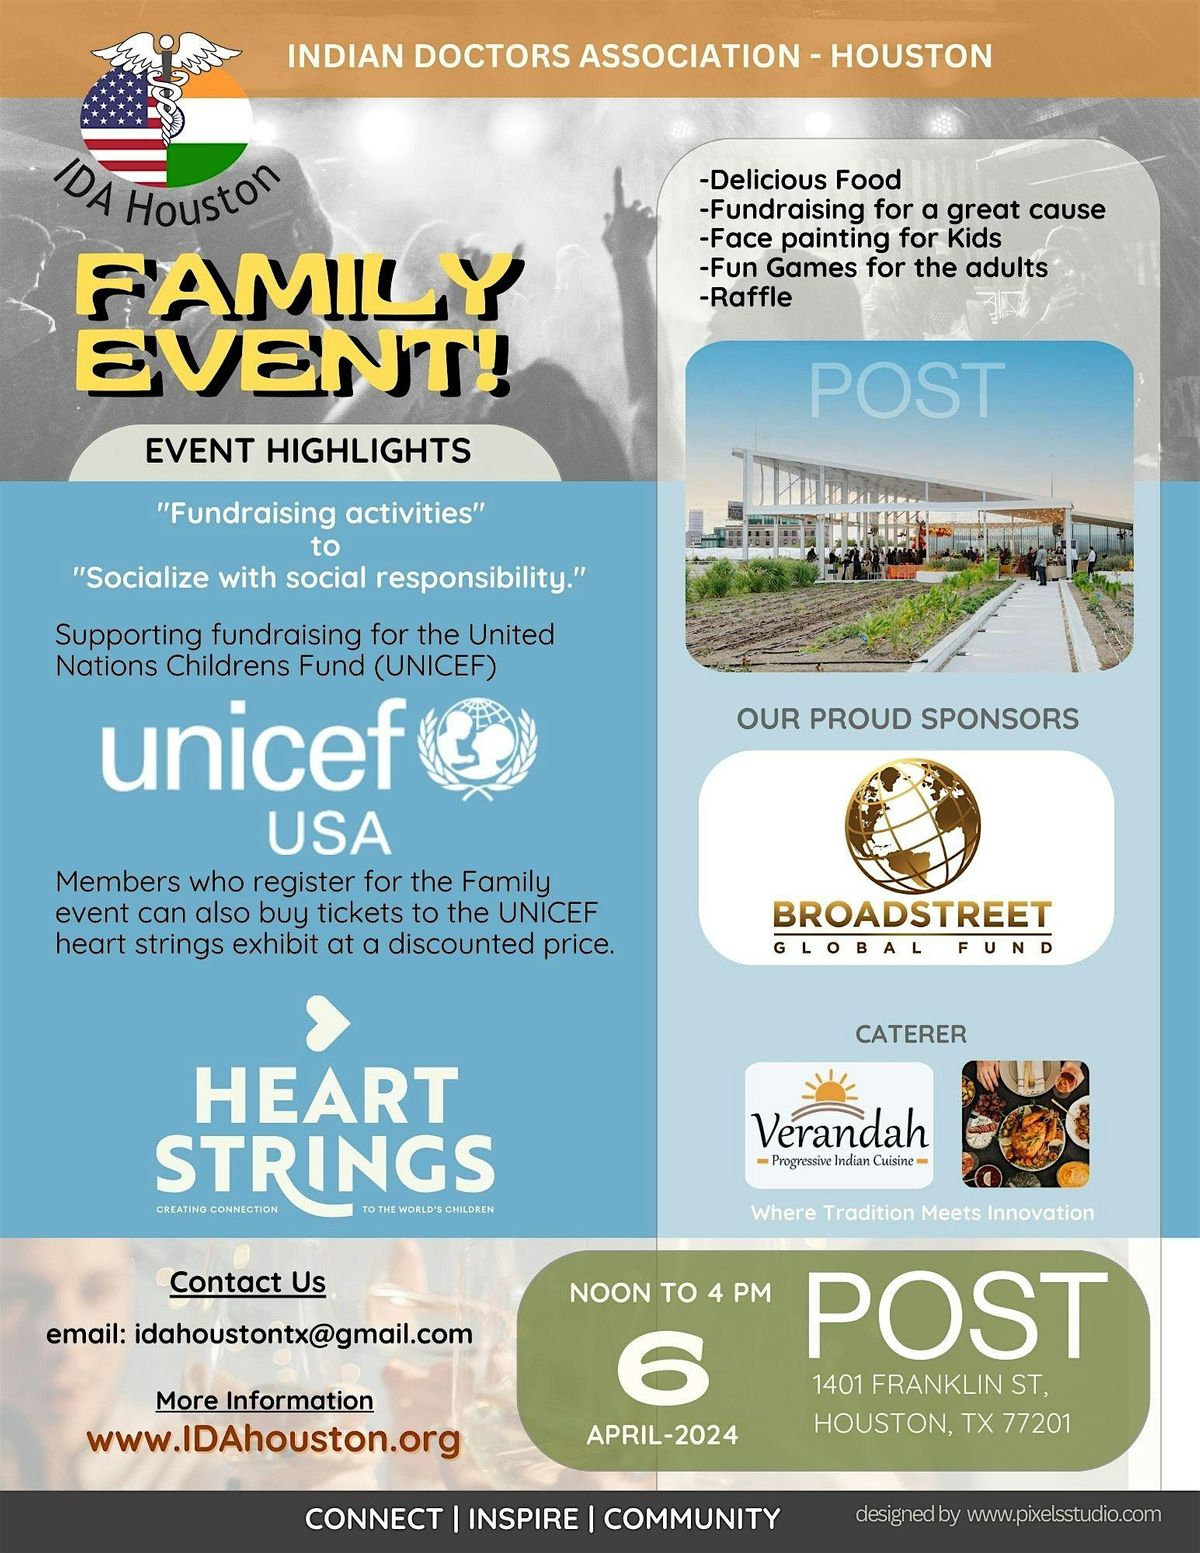 IDA Family Event in Support of United Nations Children's Fund (UNICEF)